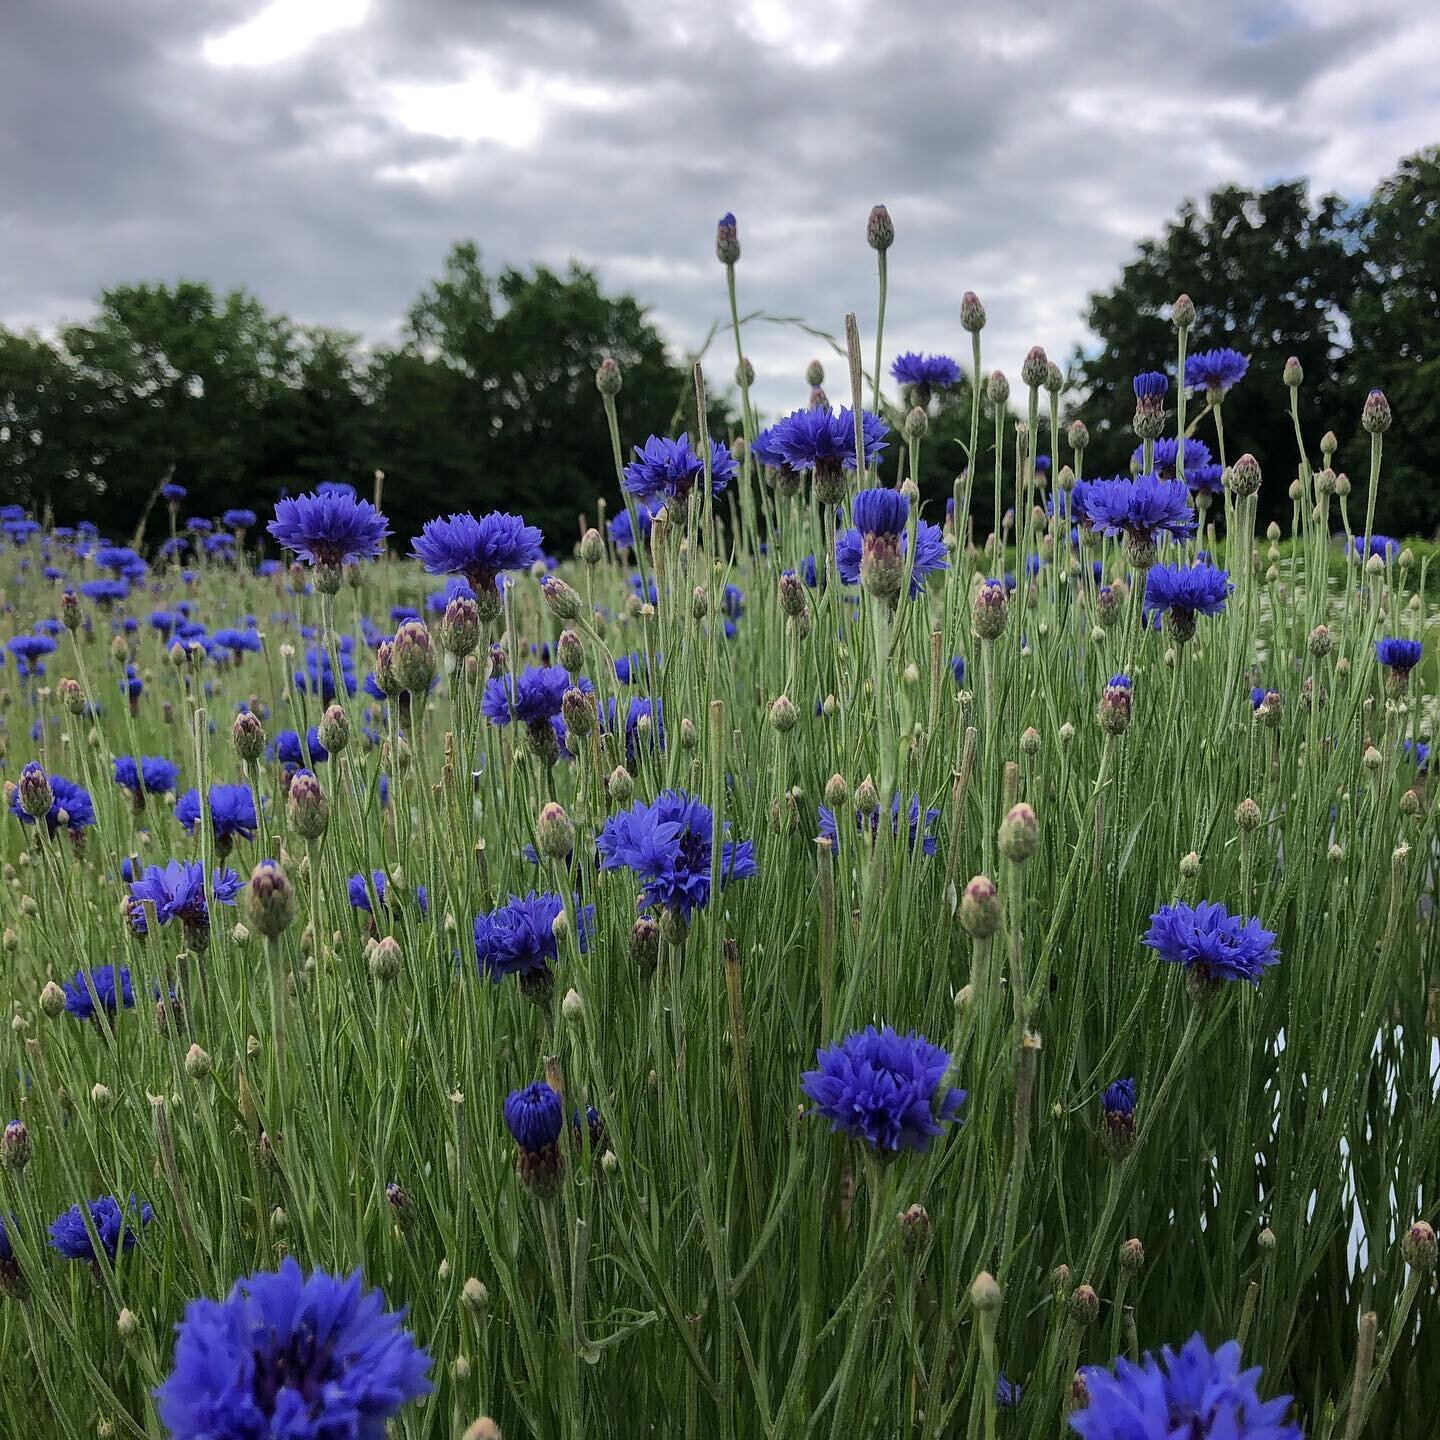 Herb Field Flowers! 
🌱
May can often leave you winded as a farmer, Spring comes on fast and furious and nature does not wait for us! 
🌸
But there are oh so many beautiful reasons to stop and take notice!
💜
Come learn about these flowers and their 